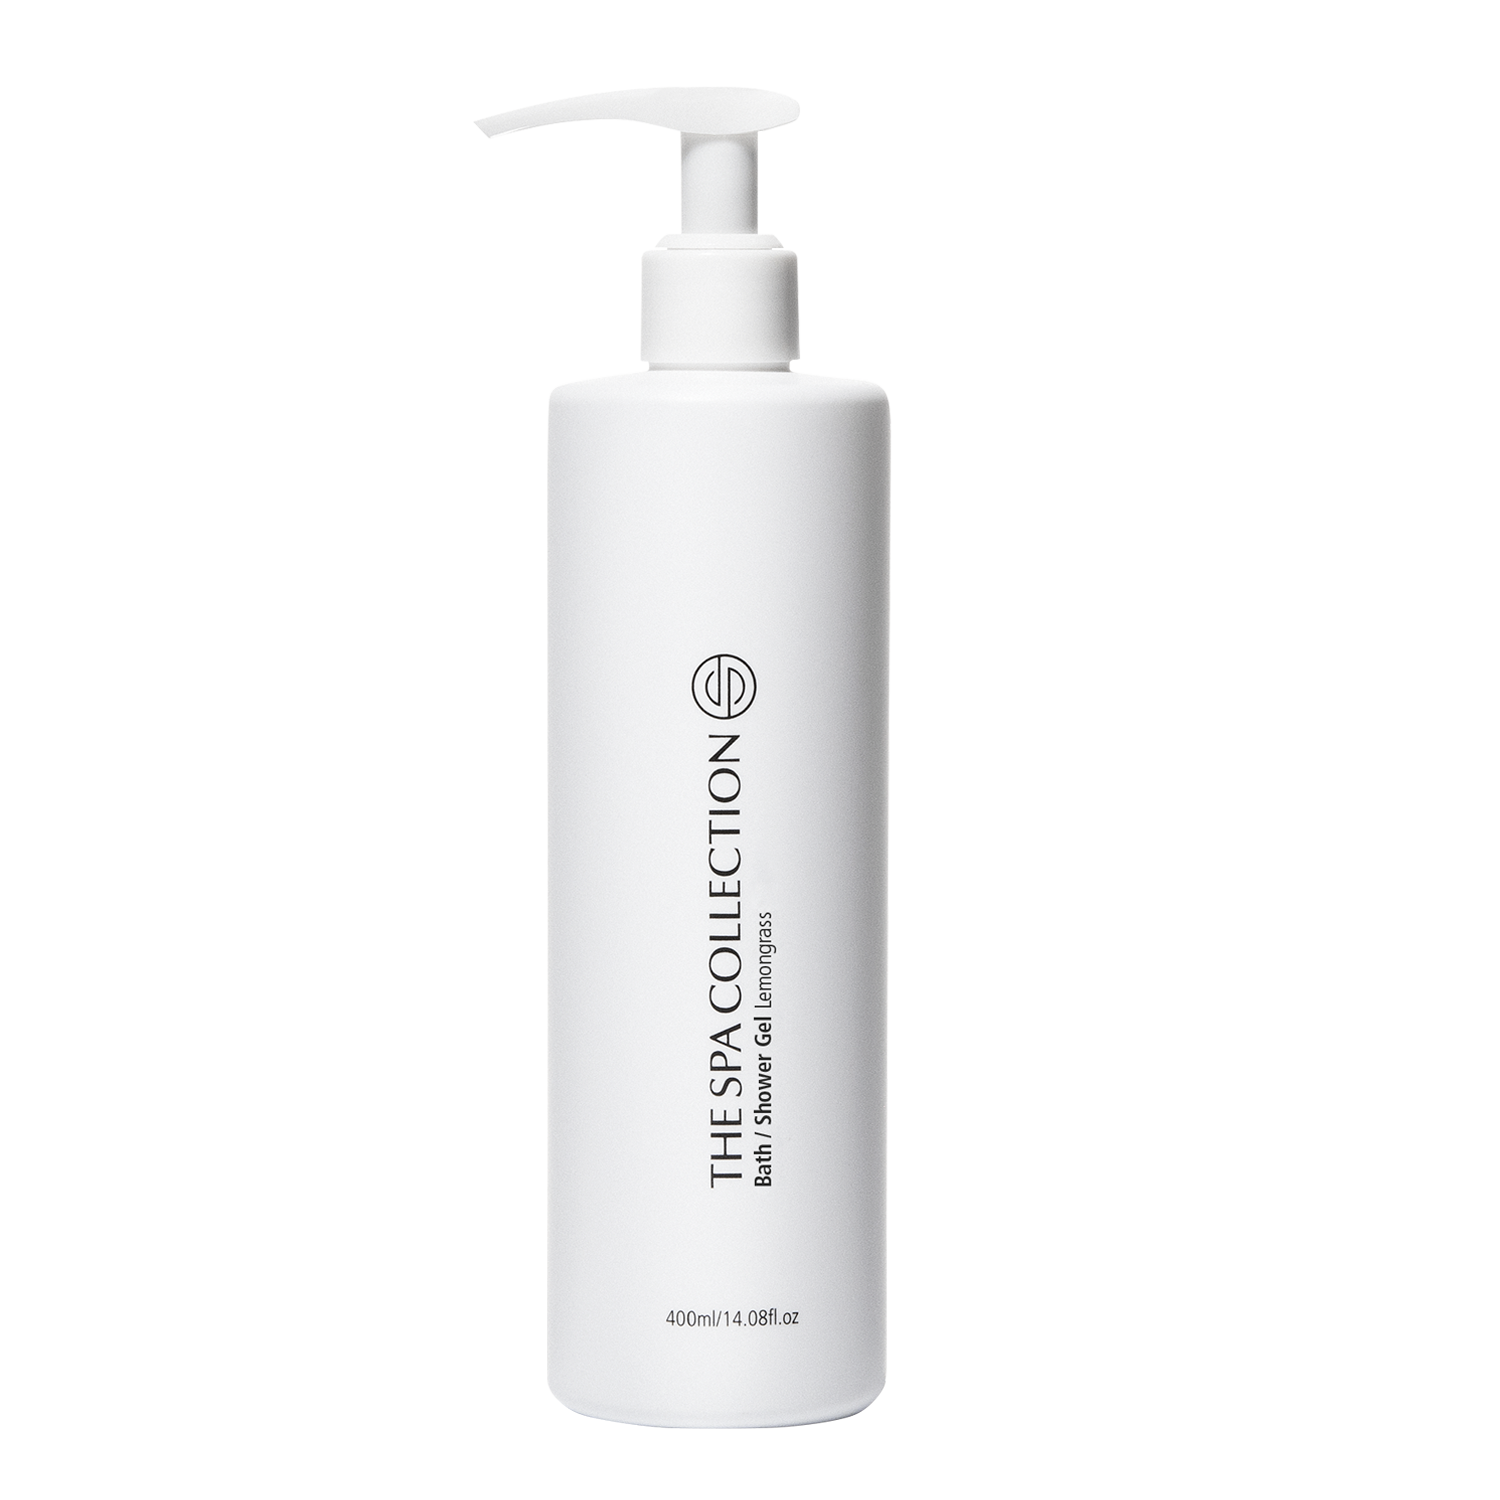 Refreshing body wash with lemongrass scent by The Spa Collection in a white, minimal modern packaging with pump and 400ml.